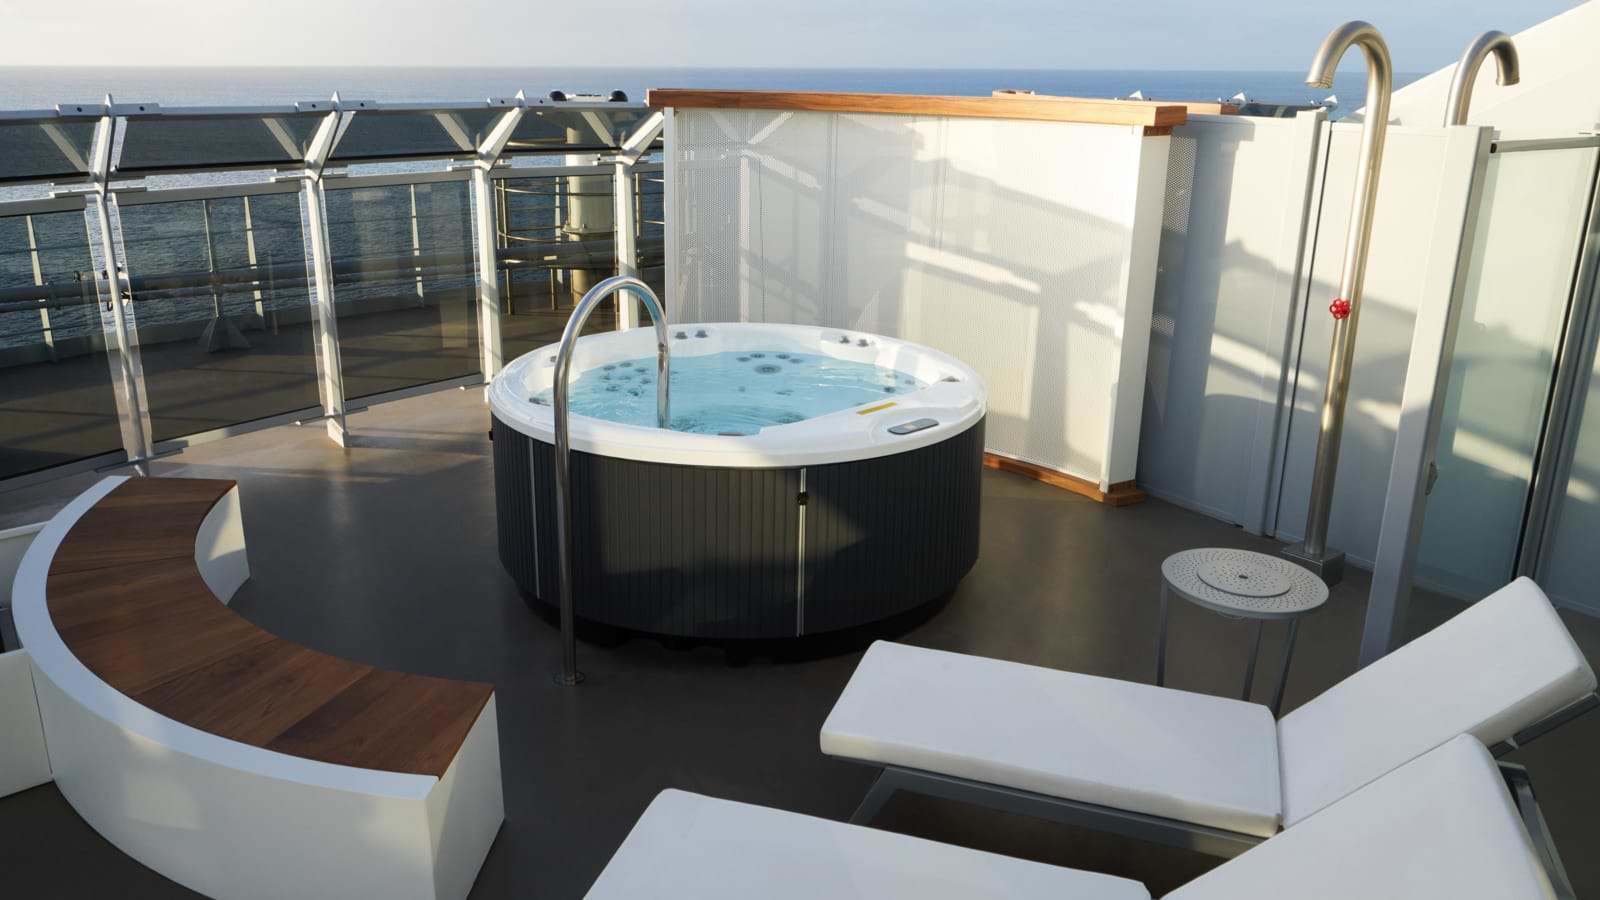 Massive suite terrace with Jacuzzi and loungers